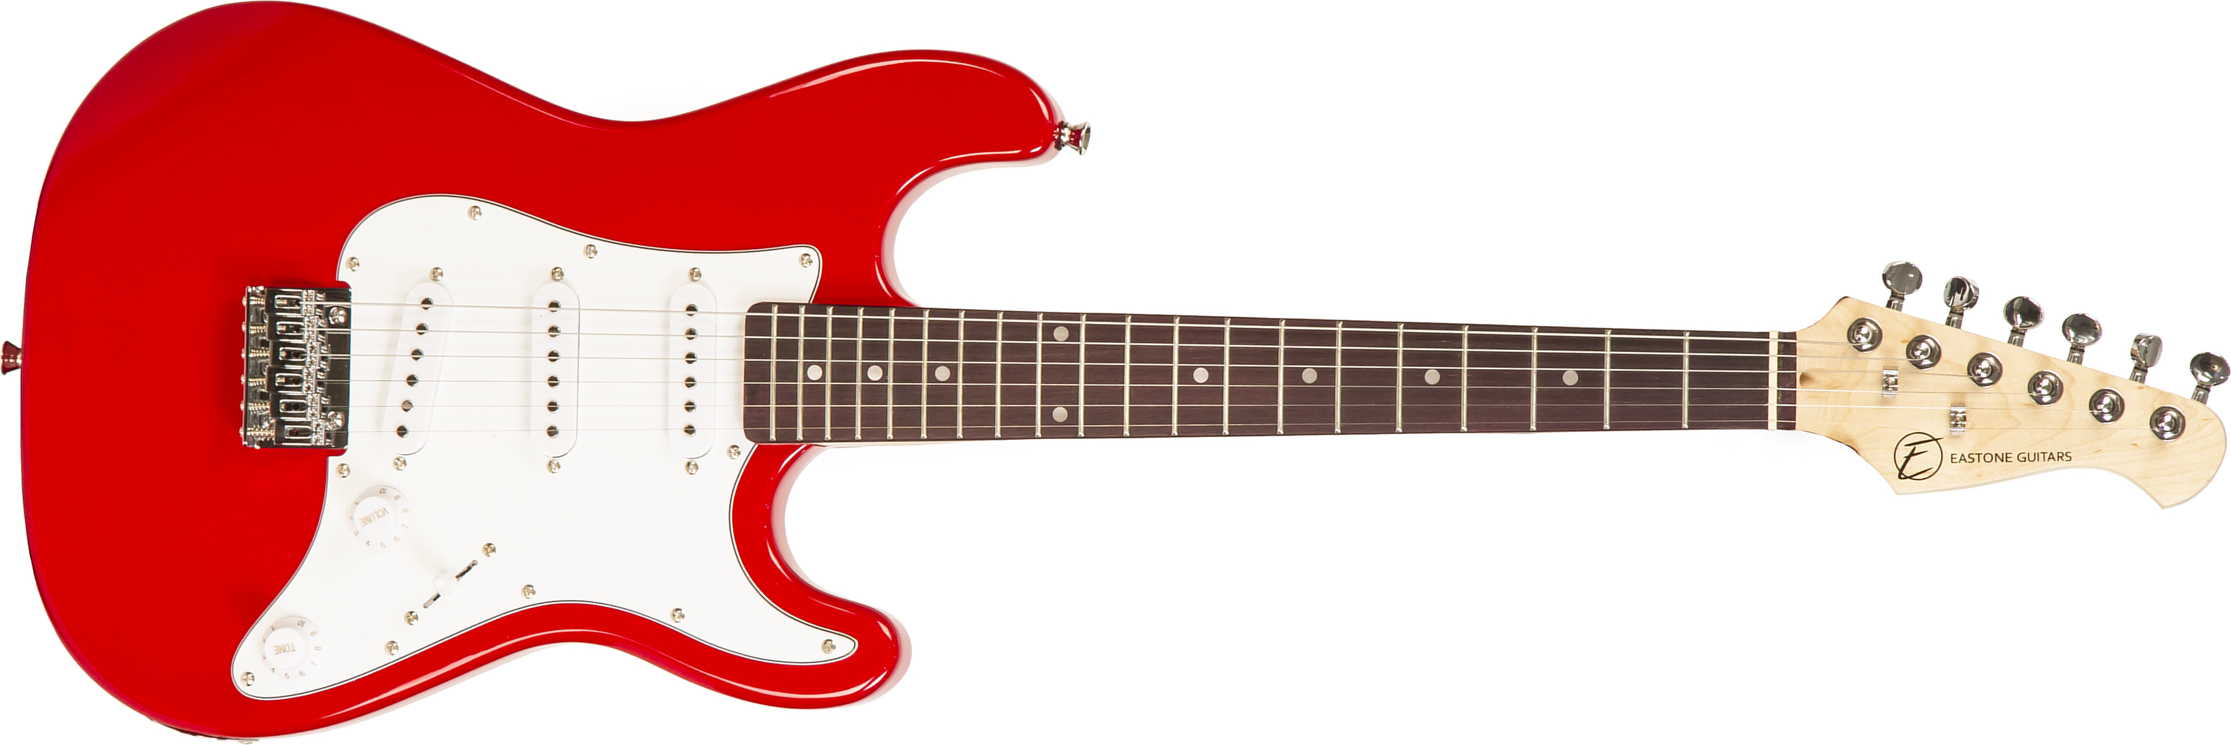 Eastone Str Mini Sss Ht Pur - Red - Electric guitar for kids - Main picture